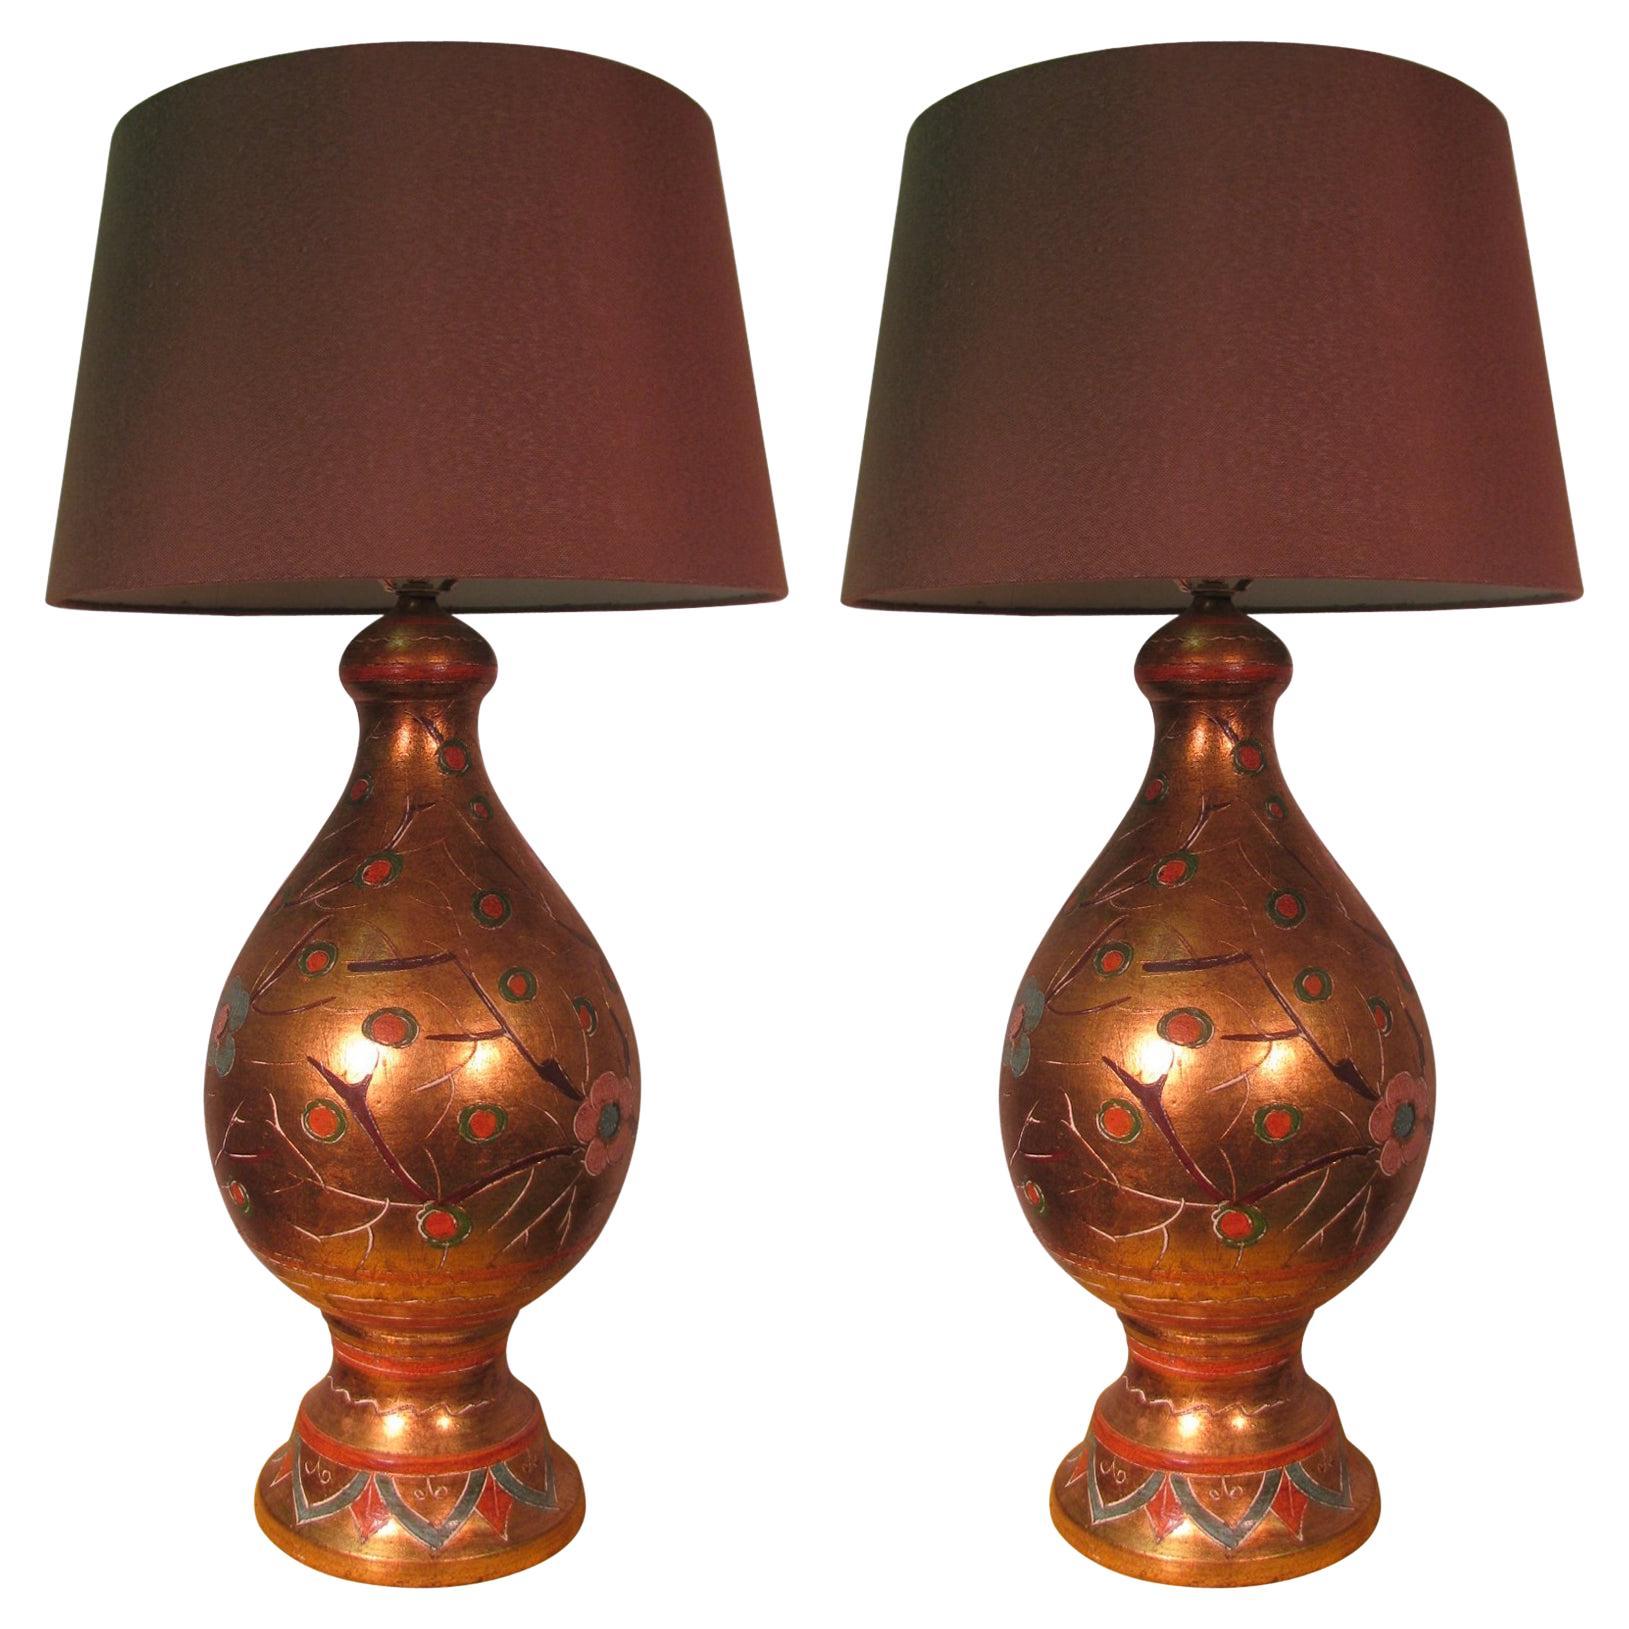 Pair of Hollywood Regency Handmade Italian Terracotta Gilt Decorated Table Lamps For Sale